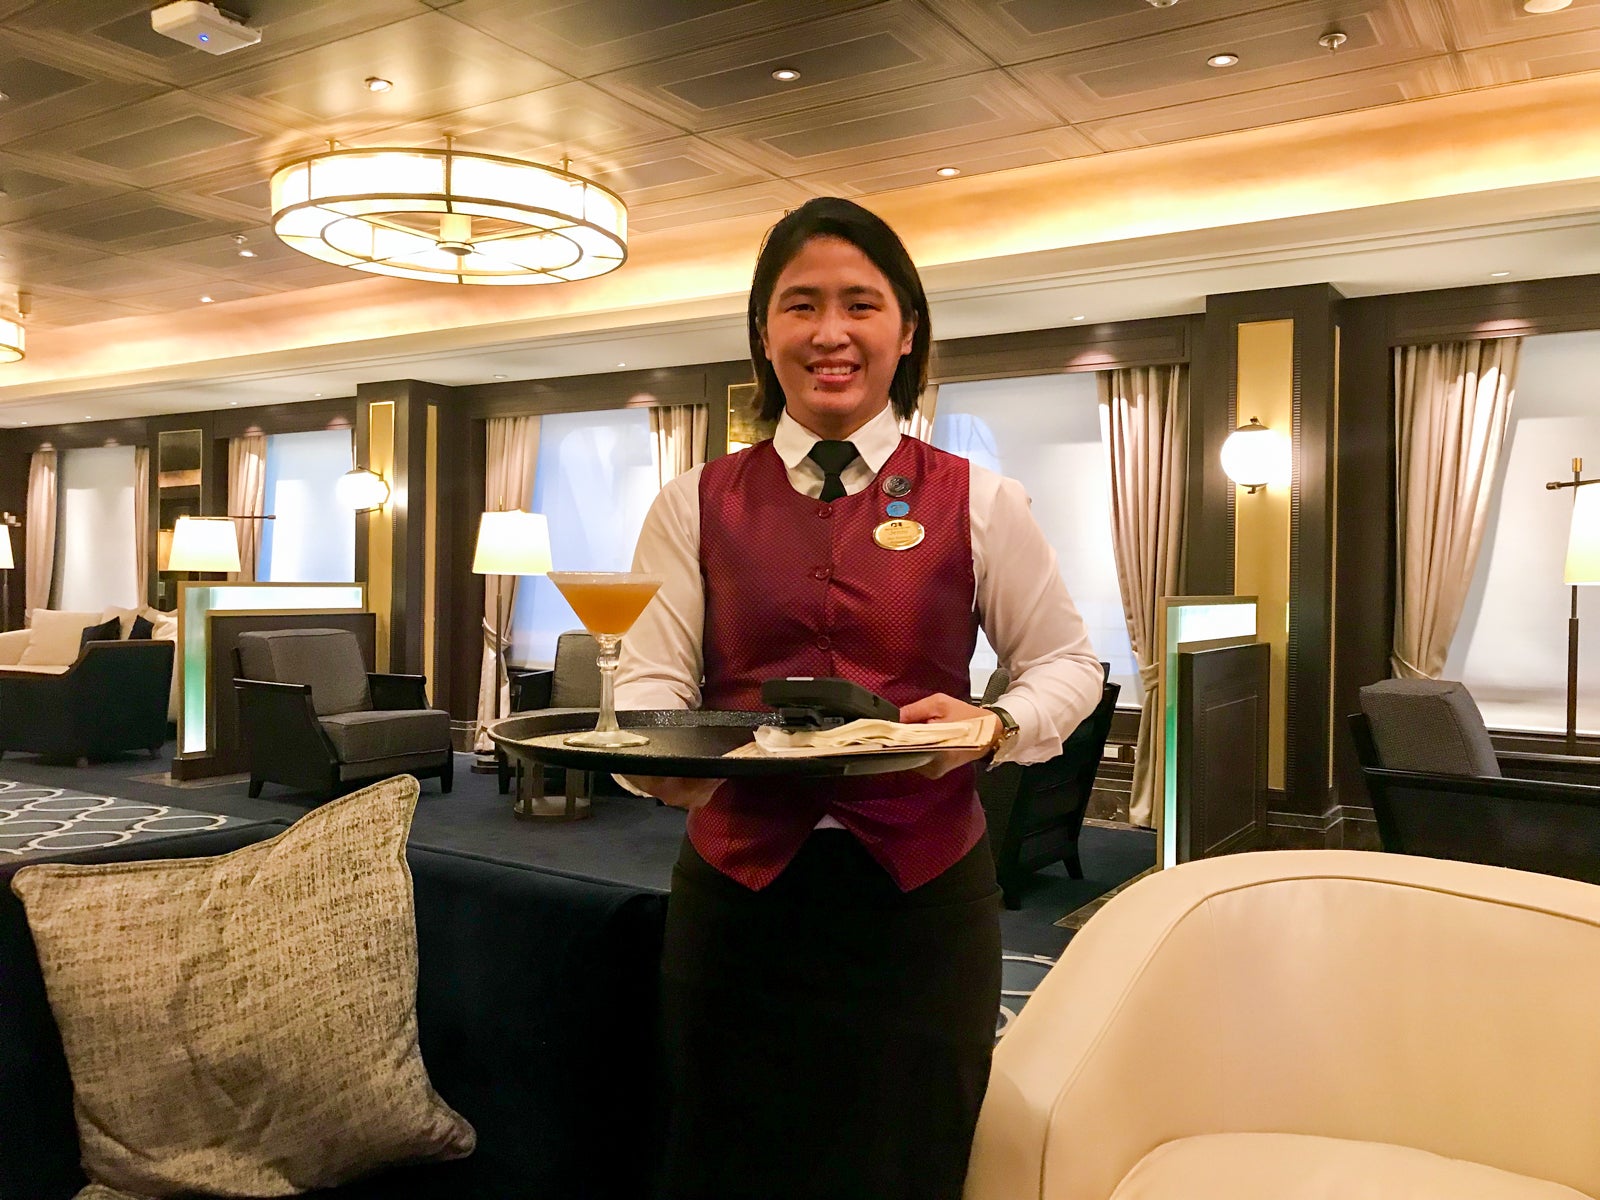 A server on a Princess ship delivers a drink to a customer